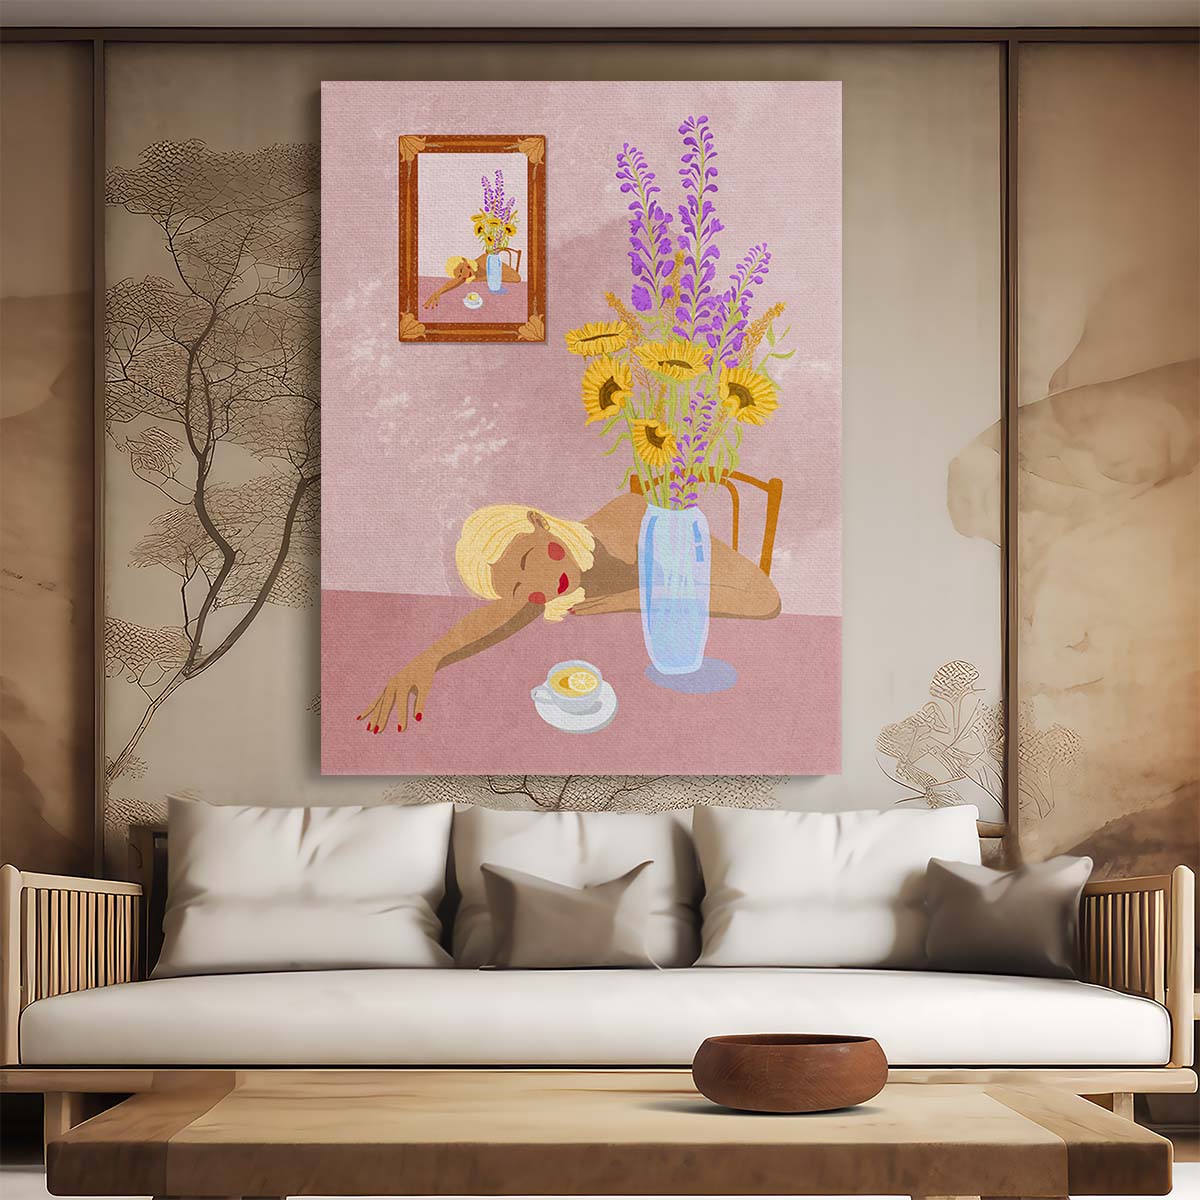 Daydreaming Woman Illustration with Sunflower Vase, Feminine Indoor Art by Luxuriance Designs, made in USA